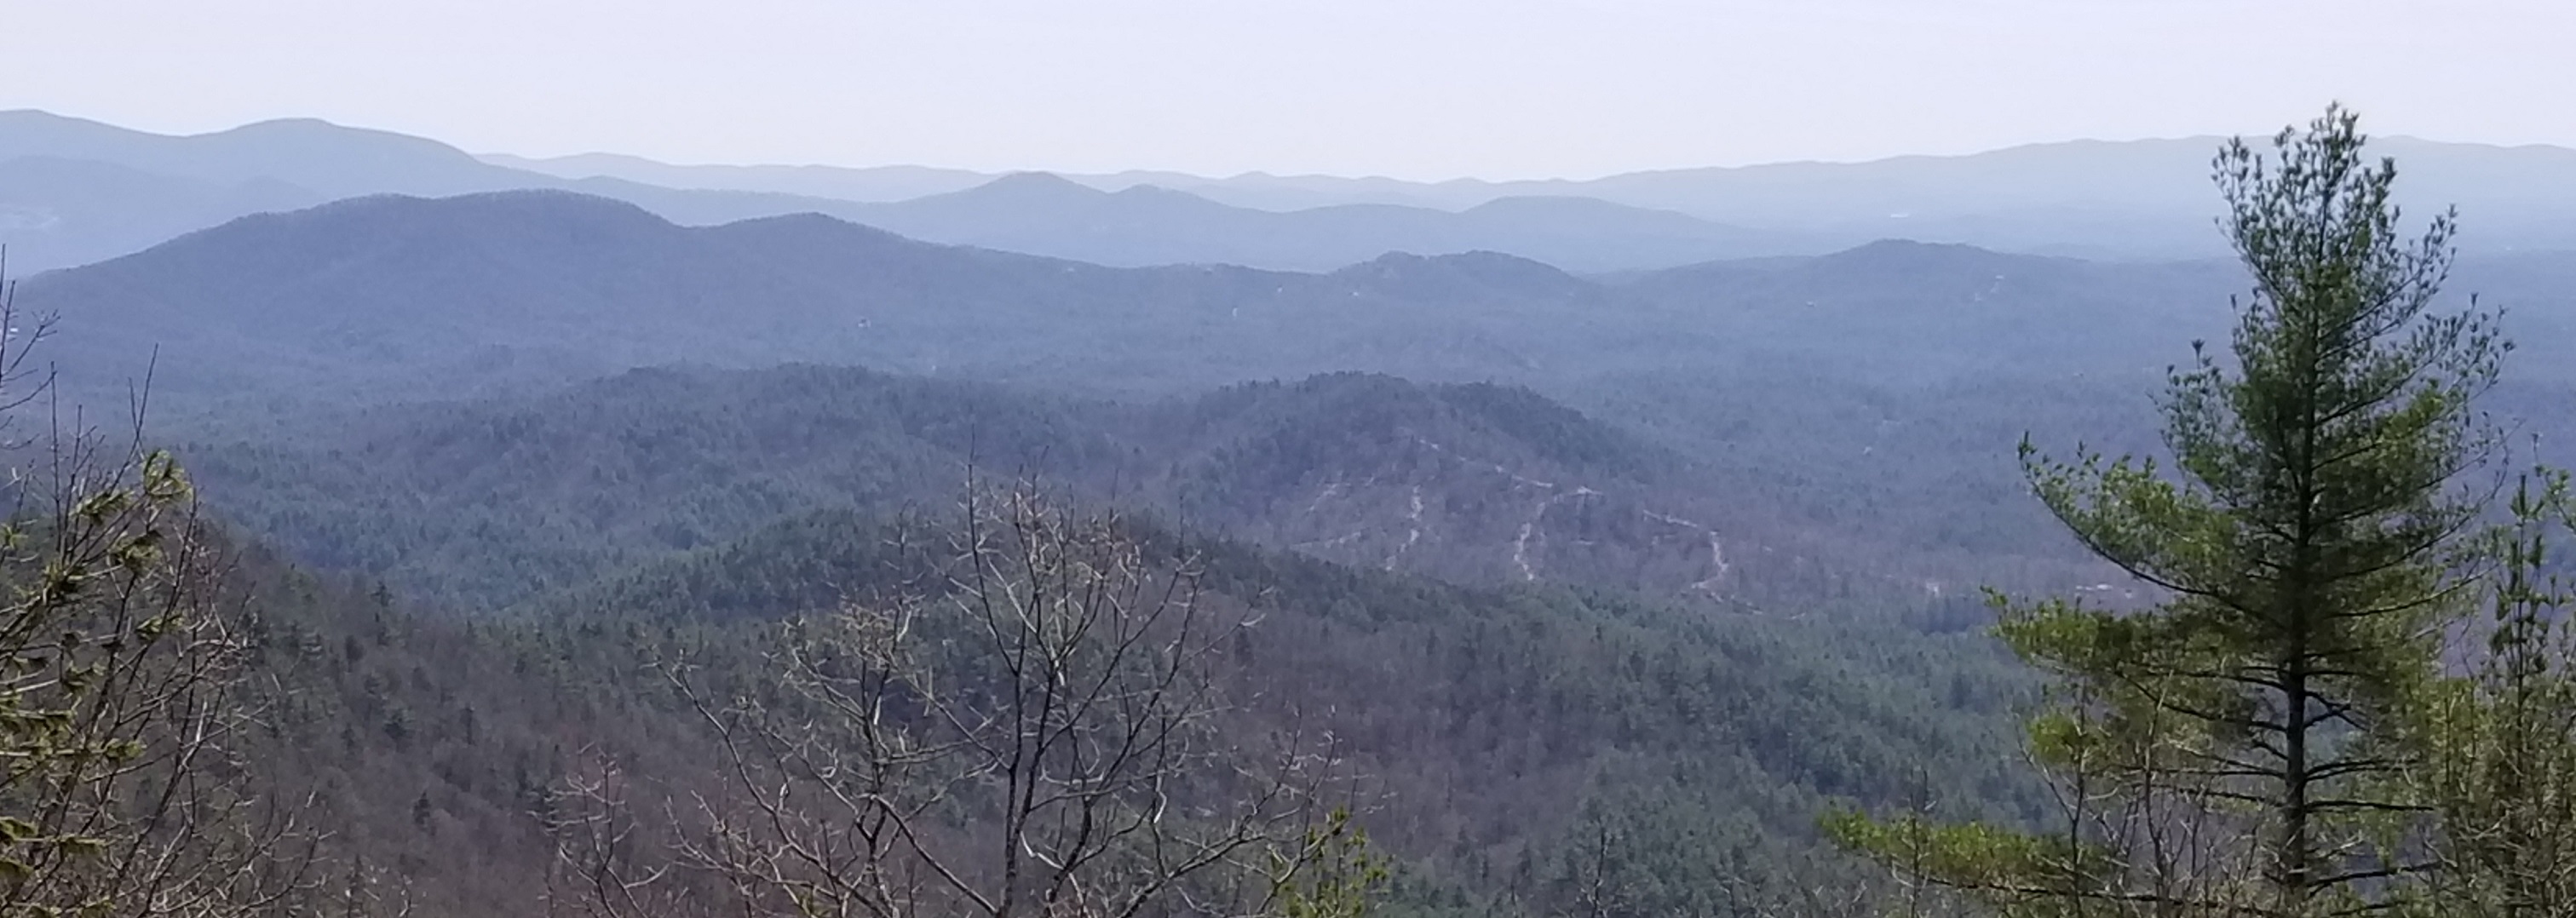 The Cohutta Wilderness and the Conasauga River Trail